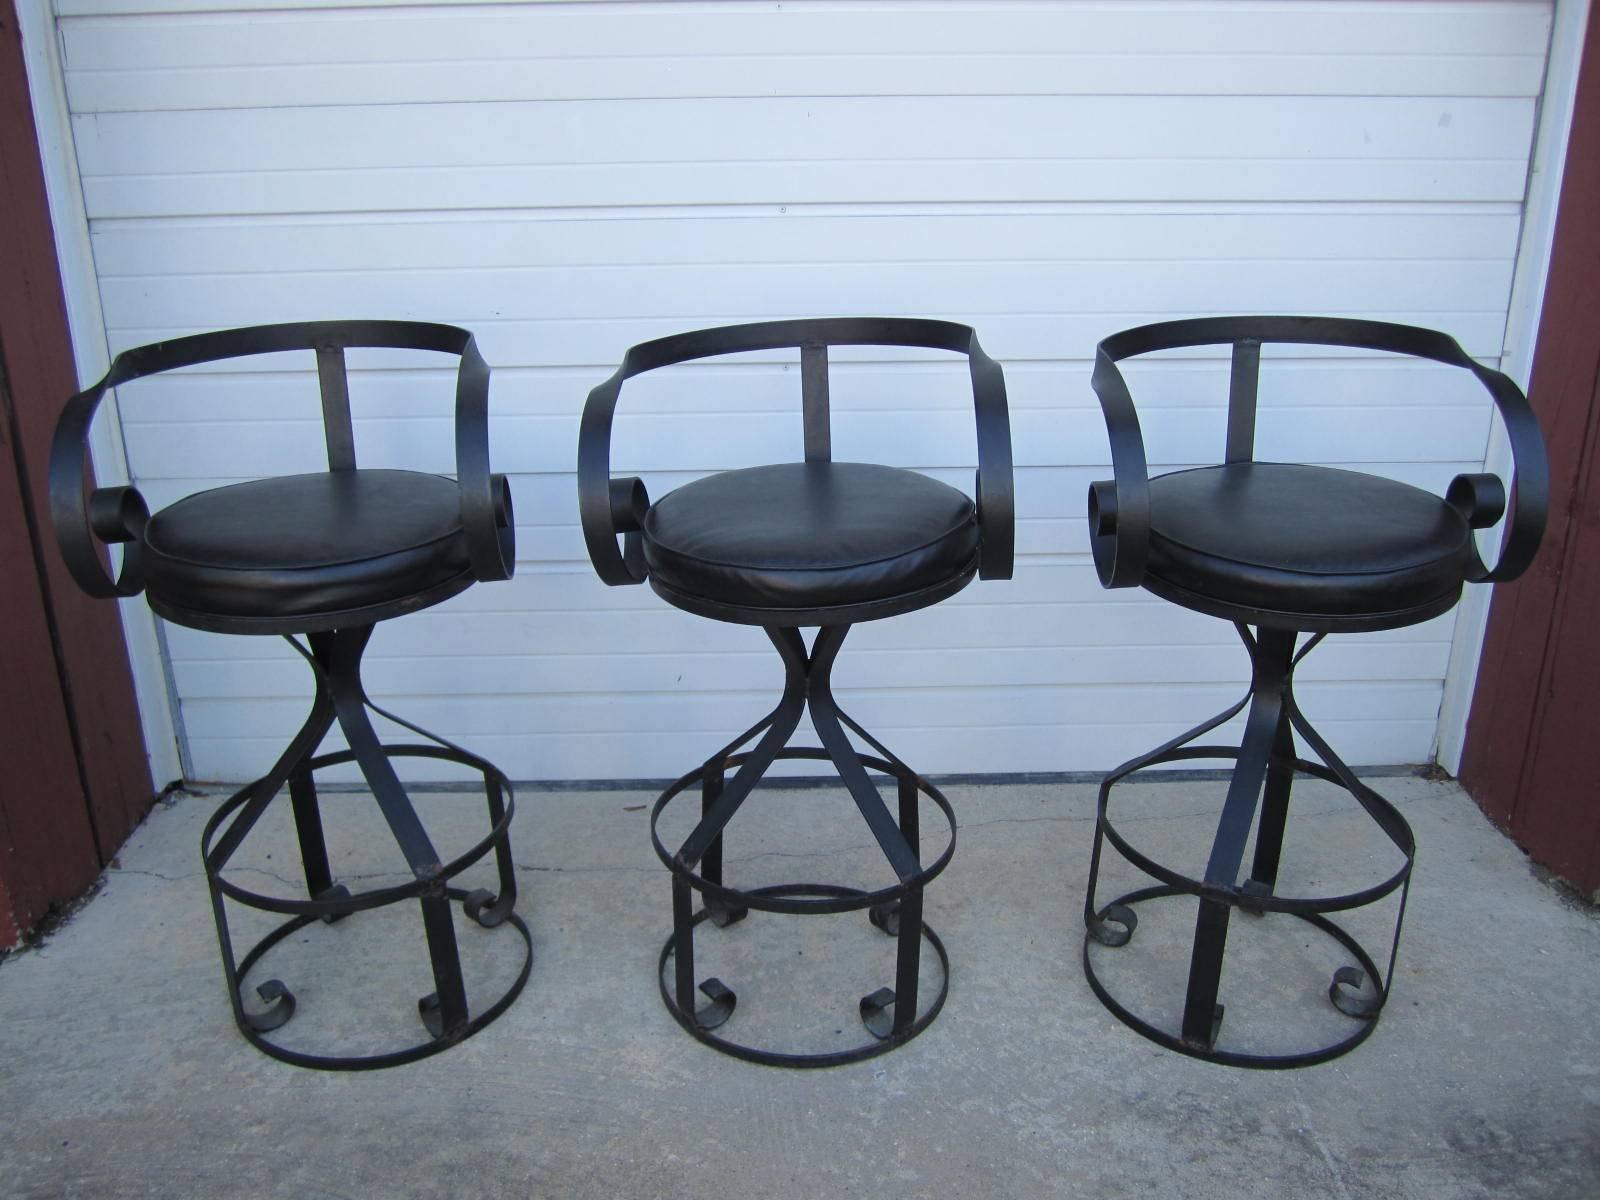 Fantastic set of five Mulhauser Sultana style iron barstools. Great looking faux black leather swivel seats look perfect on the curly armed iron bases. These are true barstools having a seat height of 29